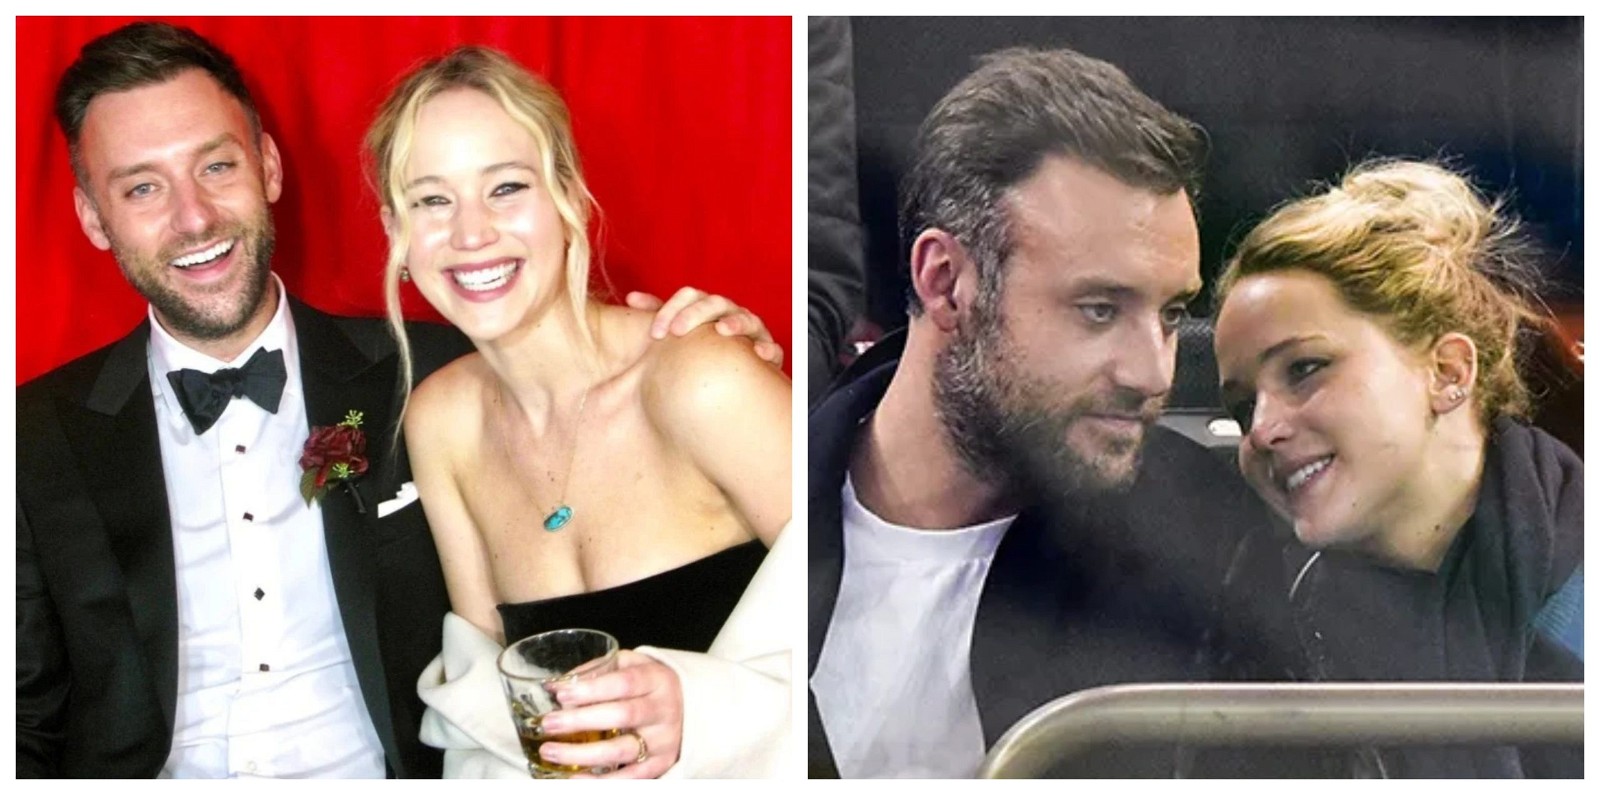 Jennifer Lawrence Scared of Having S*ẋ With Men, Admitted Being Drunk ...